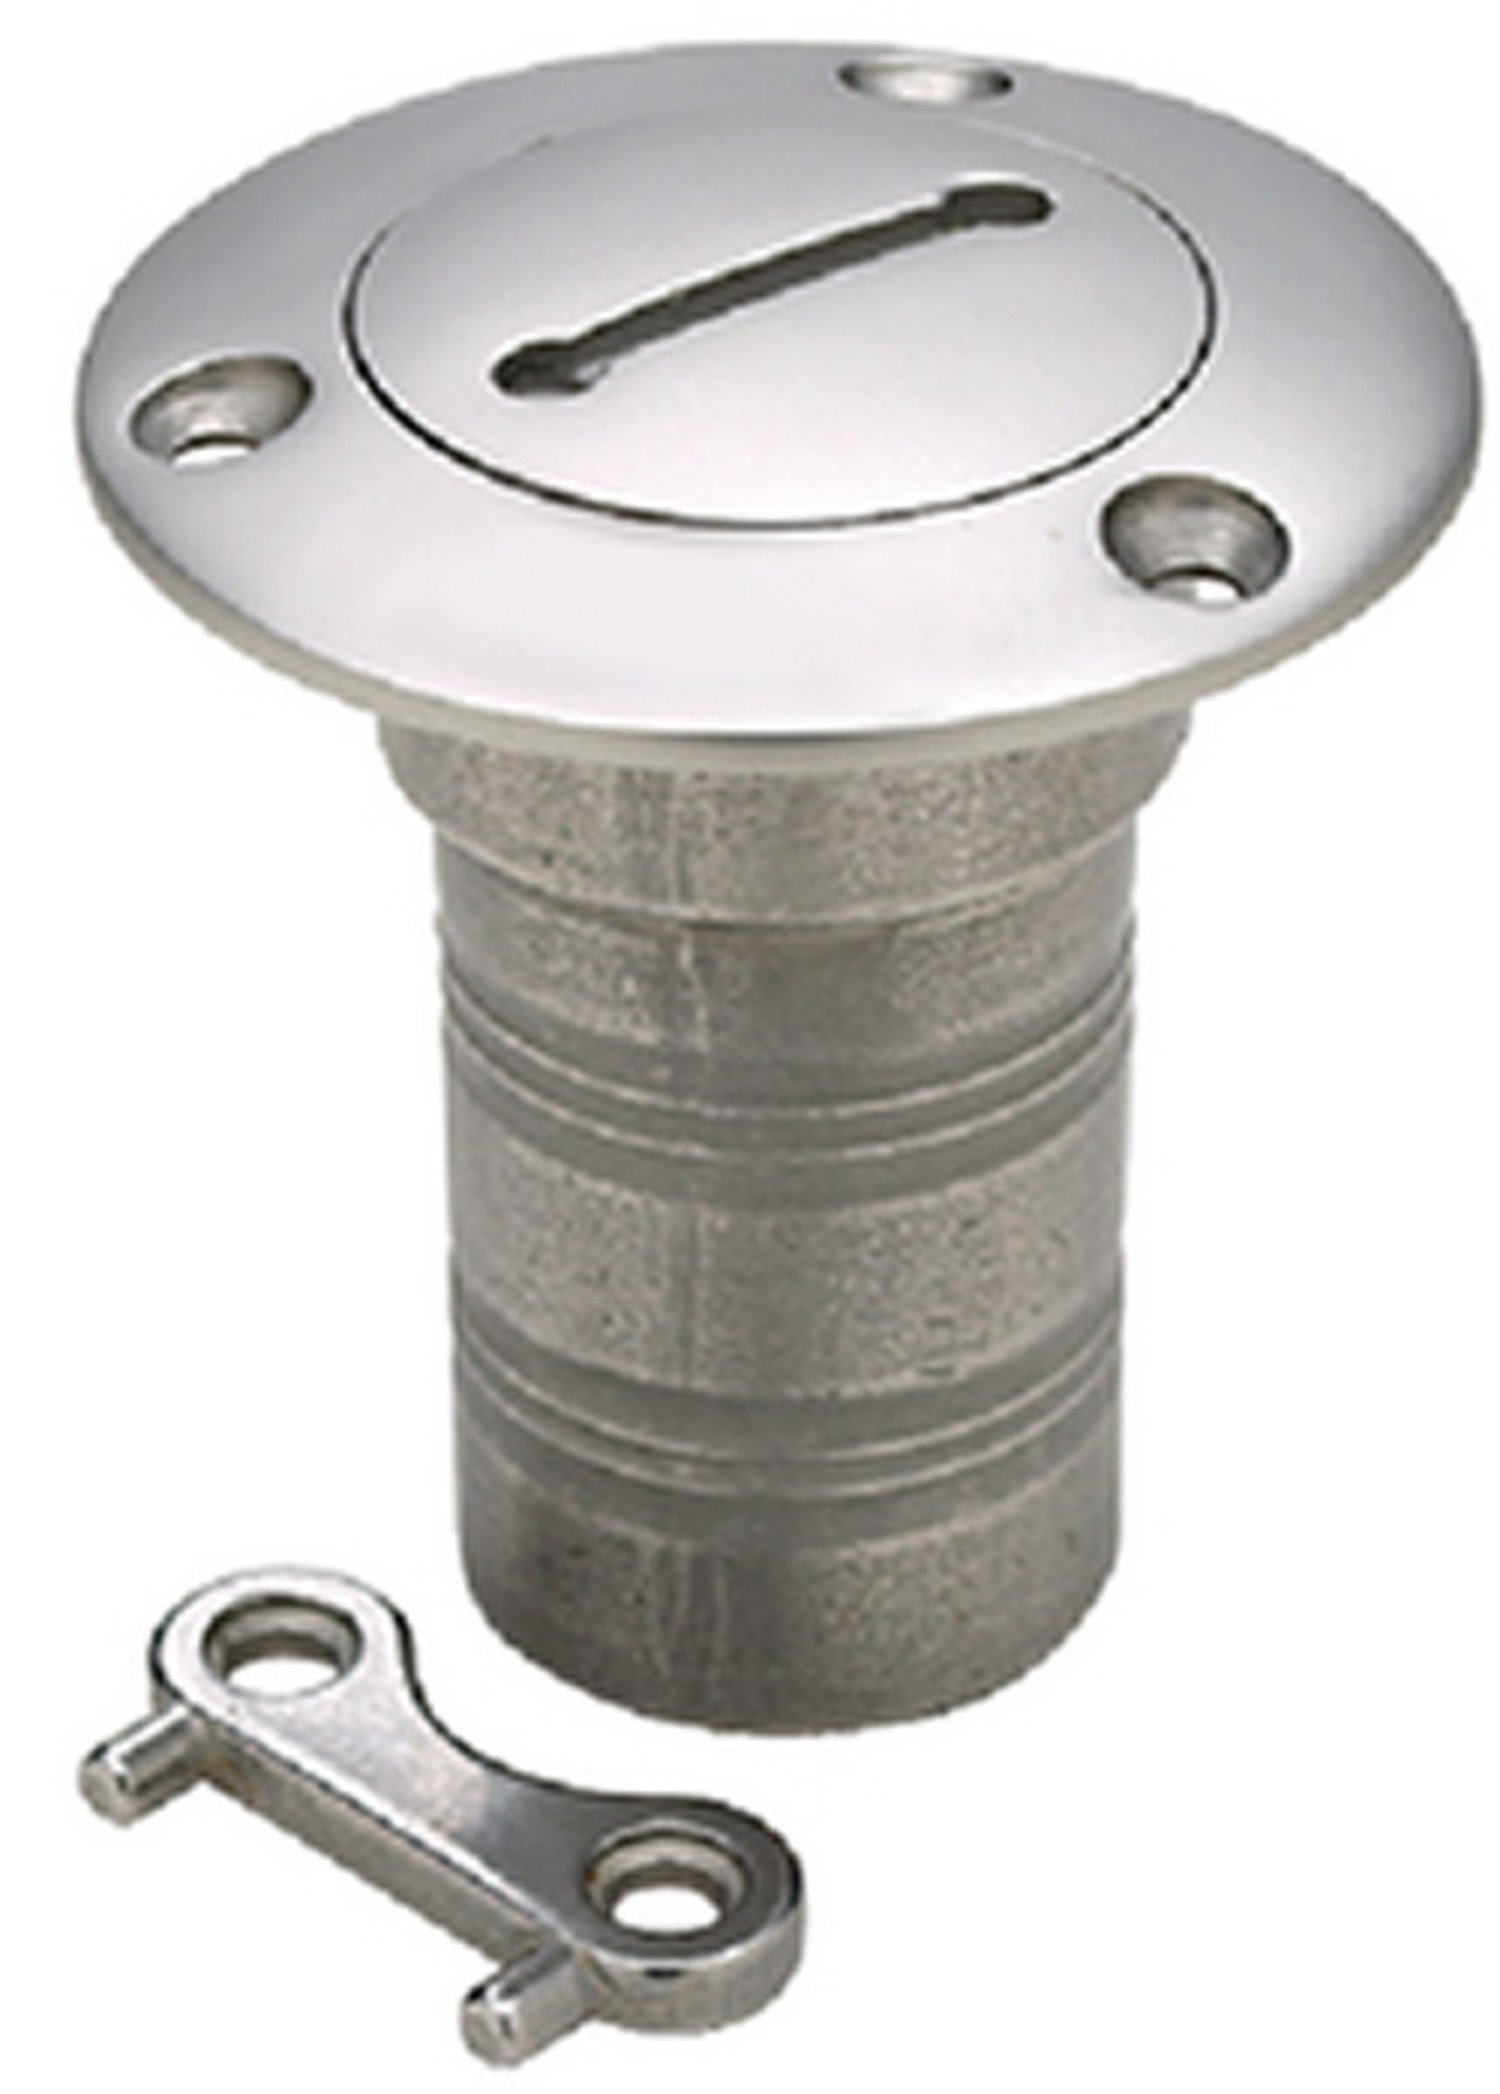 Seachoice - 50-32251 Stainless Steel Deck Fill With Cap (Chain Tether) For  1-1/2